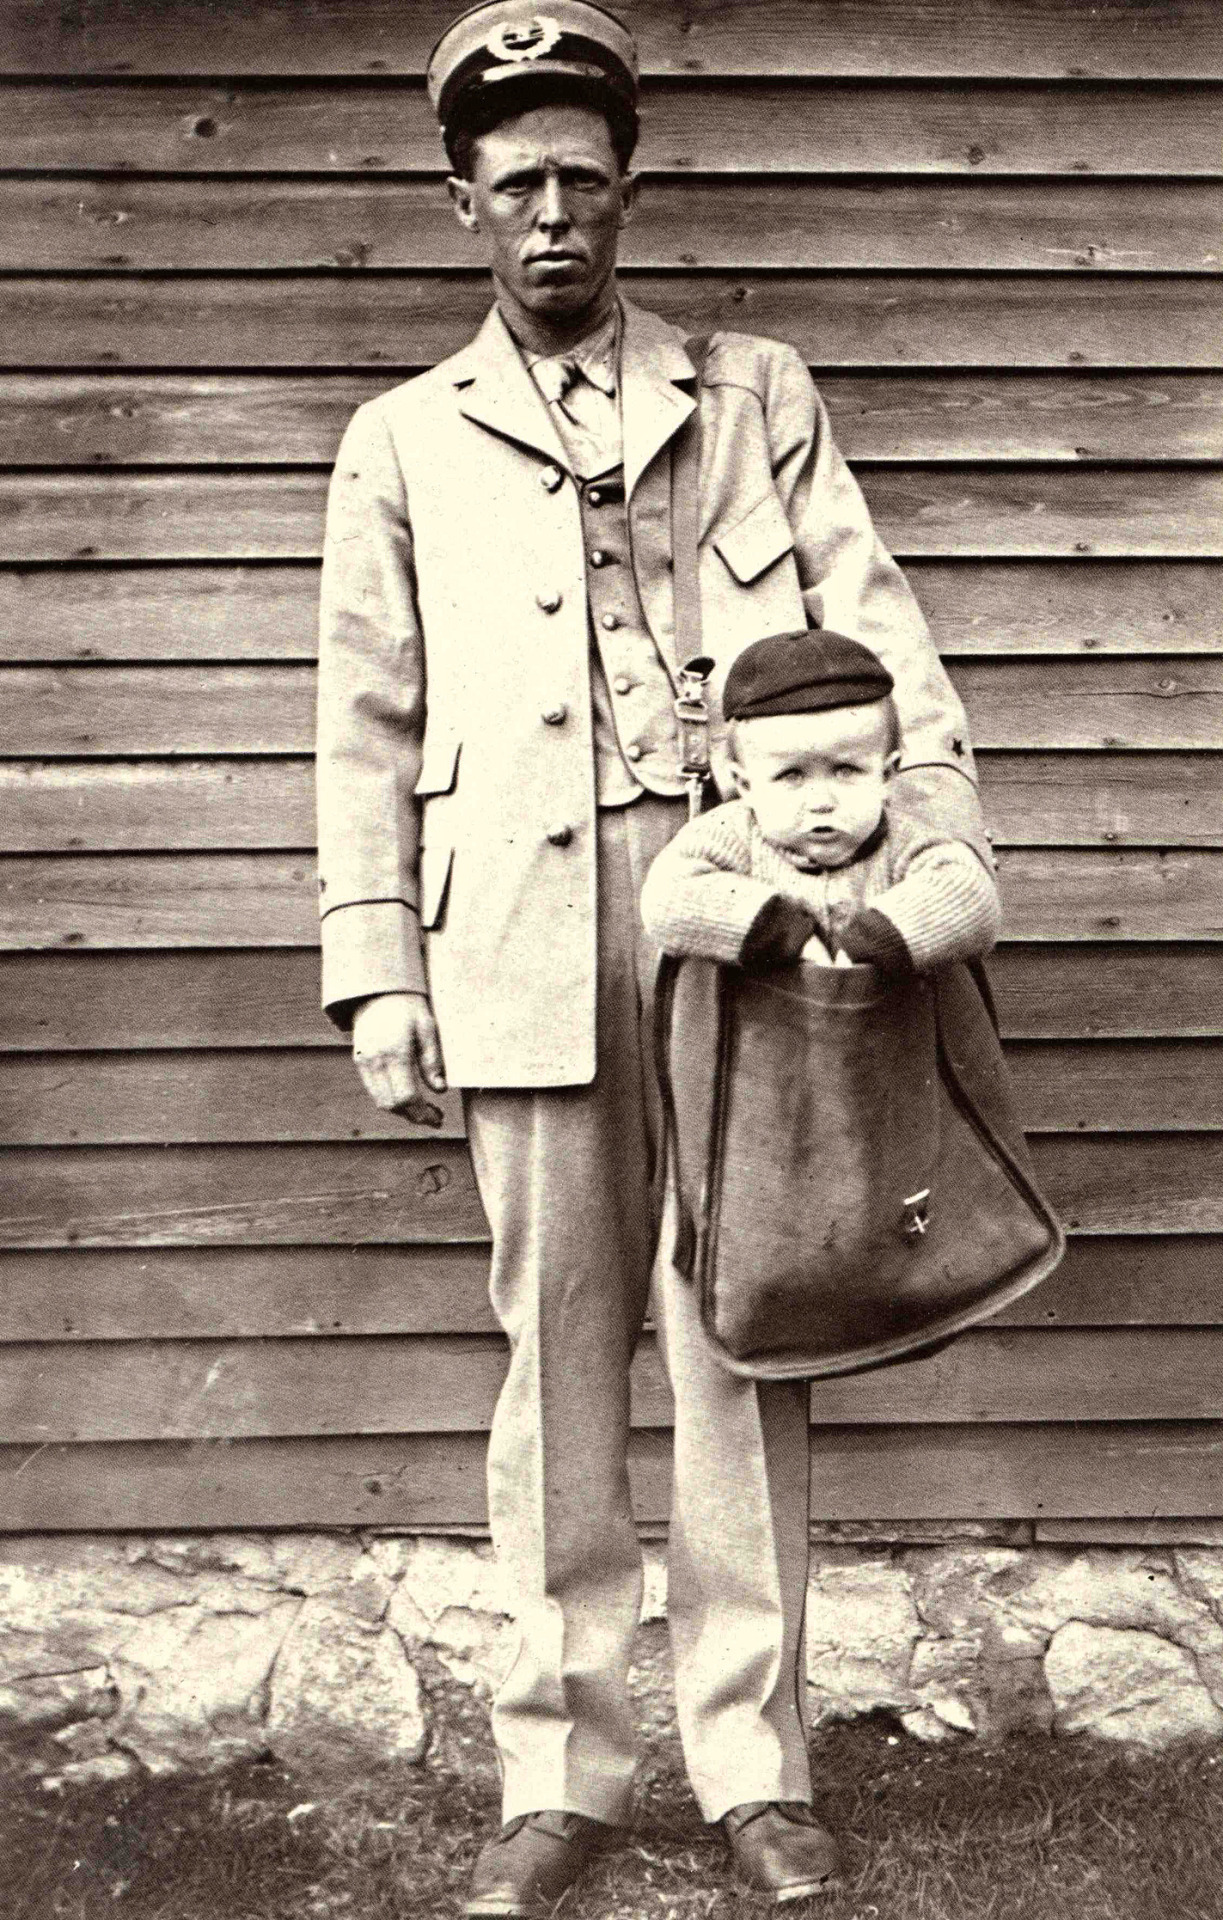 After parcel post service was introduced in 1913, at least two children were sent